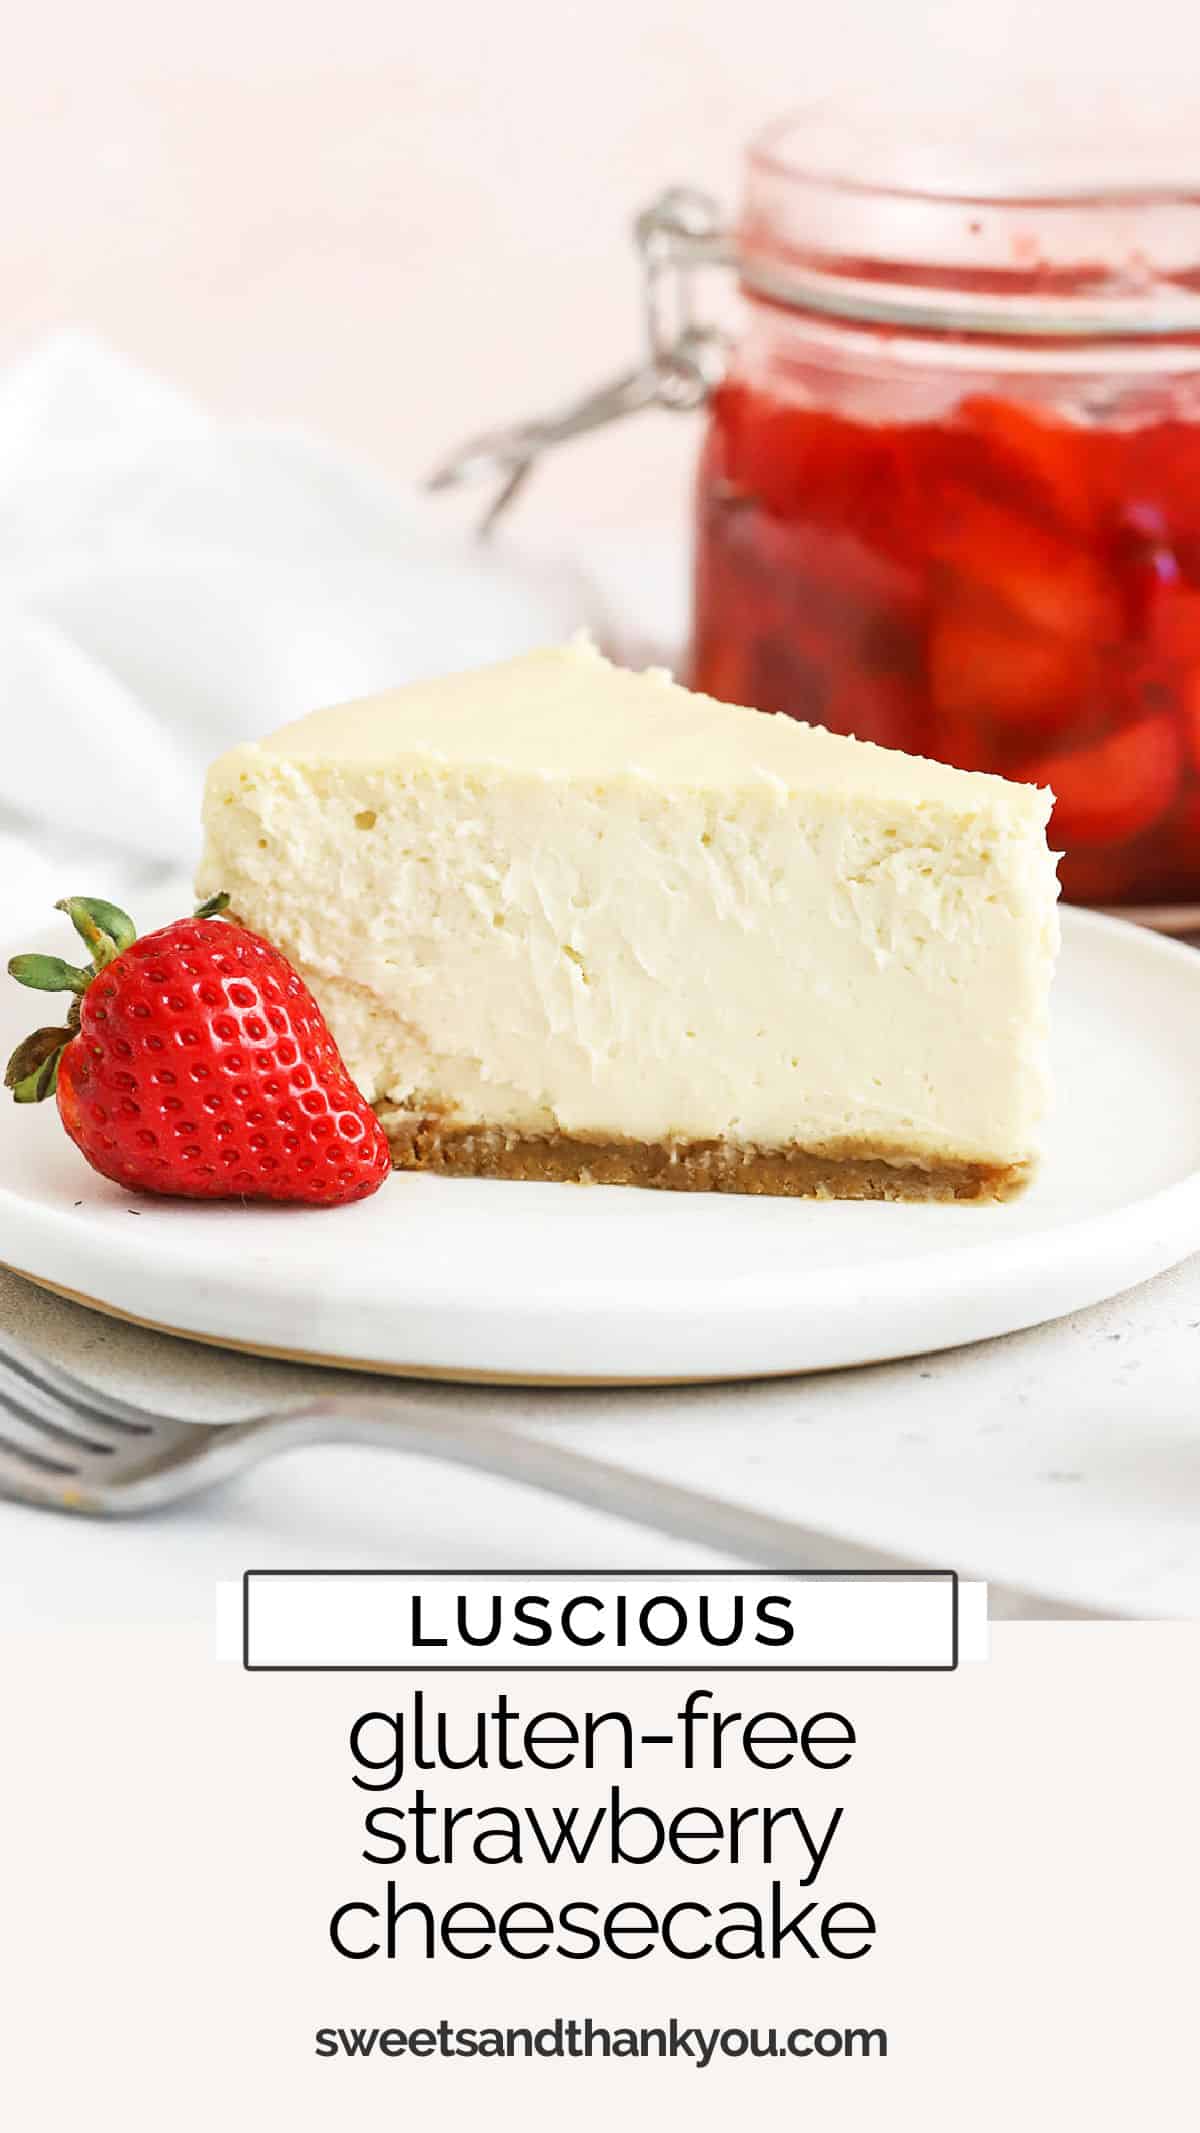 Our Gluten-Free Strawberry Cheesecake recipe is a total showstopper! Luscious glute-free cheesecake with fresh strawberry topping. It's as yummy as it looks! / strawberry cheesecake / gluten-free cheesecake recipe / strawberry topping for cheesecake / gluten-free cheesecake with strawberry sauce / 